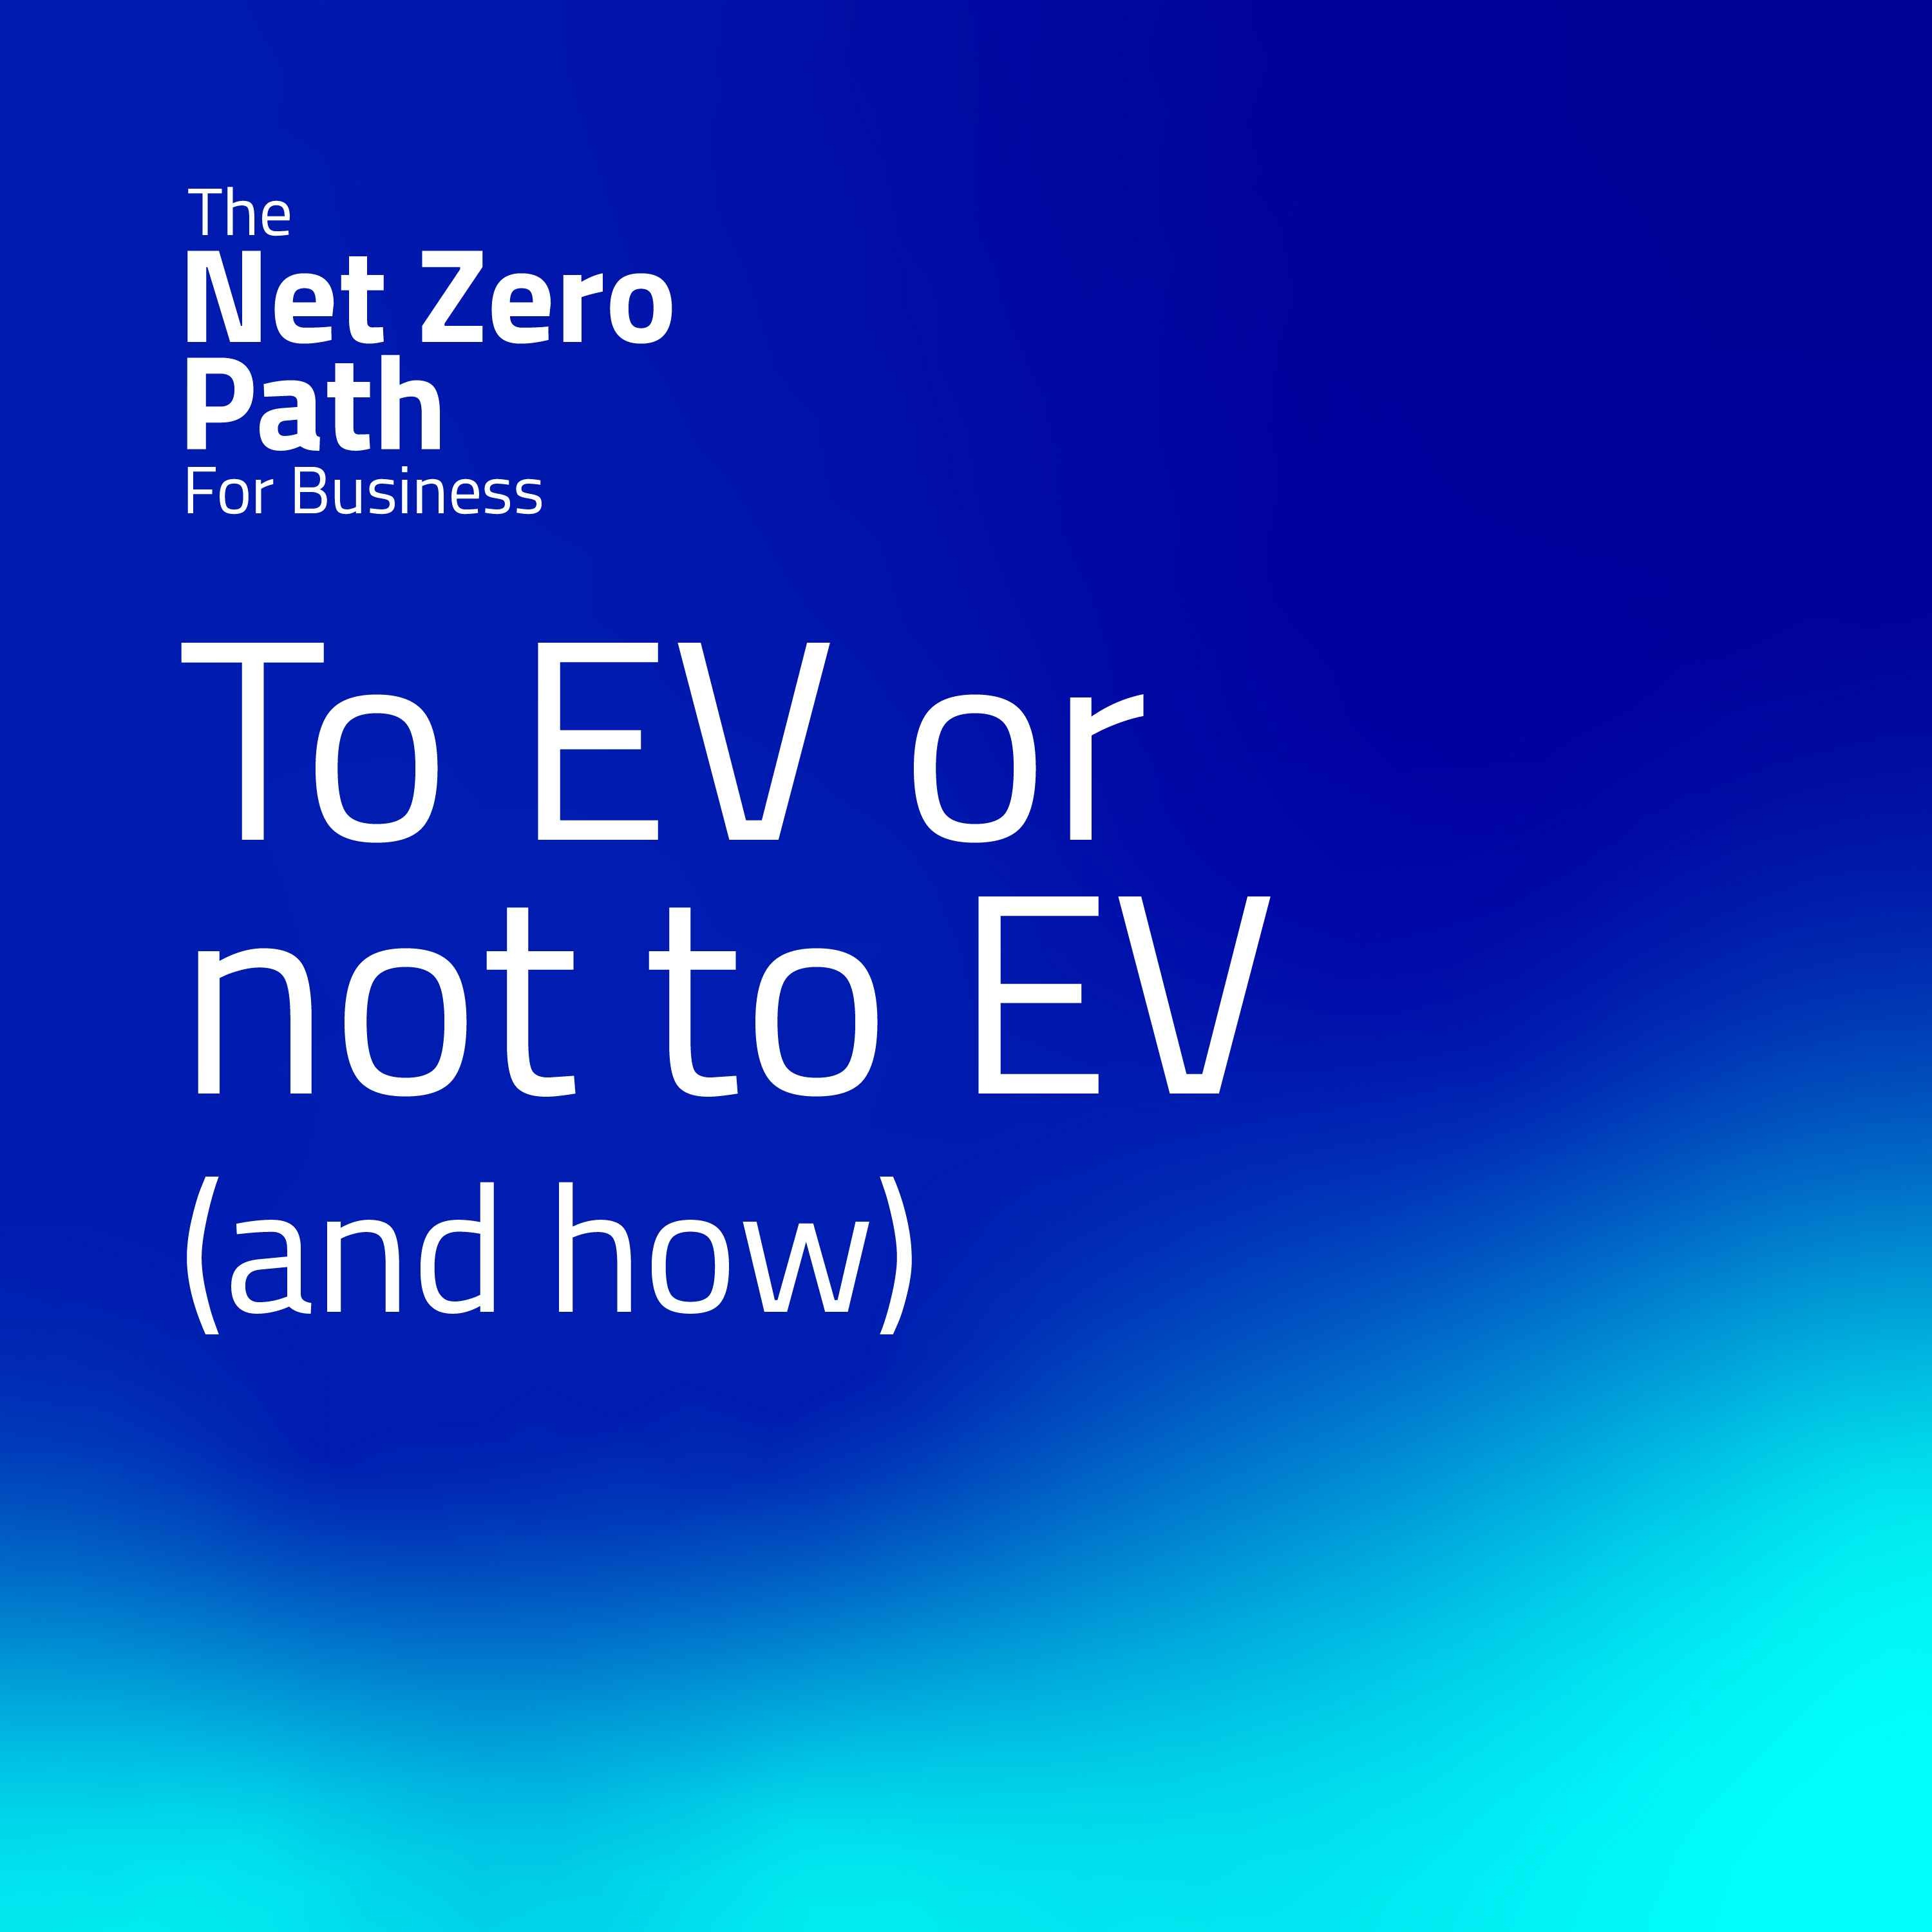 5. To EV or not to EV (and how)